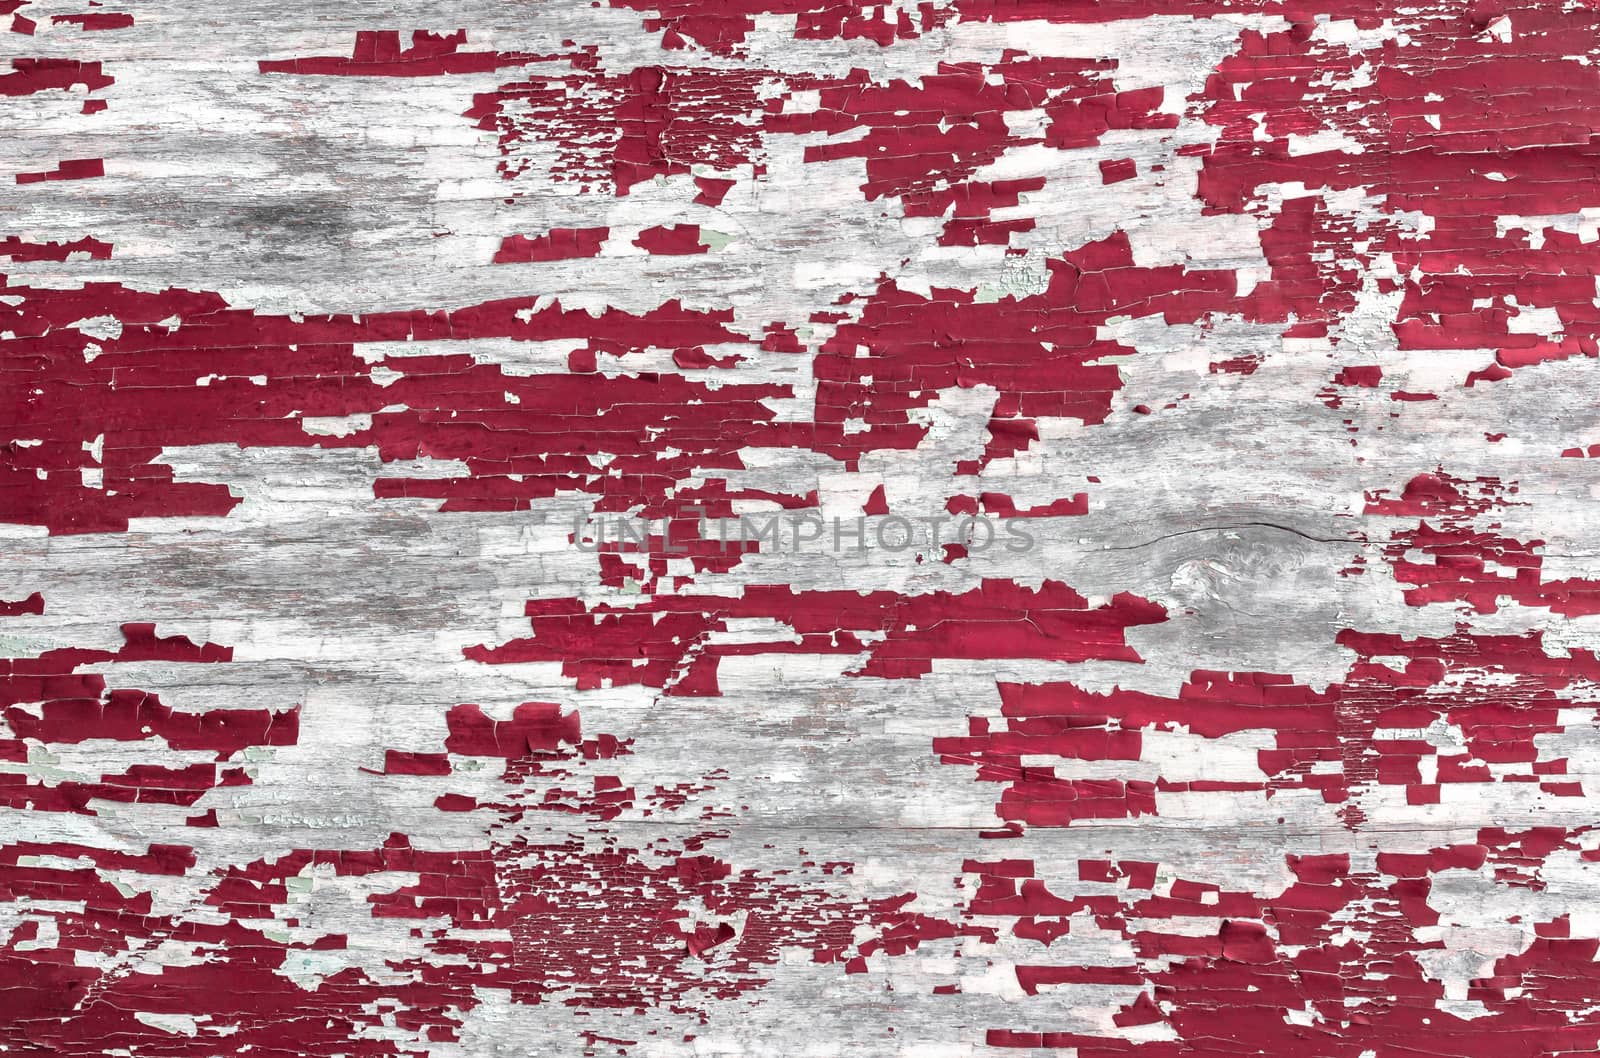 Background with grunge wooden wall with flaking paint